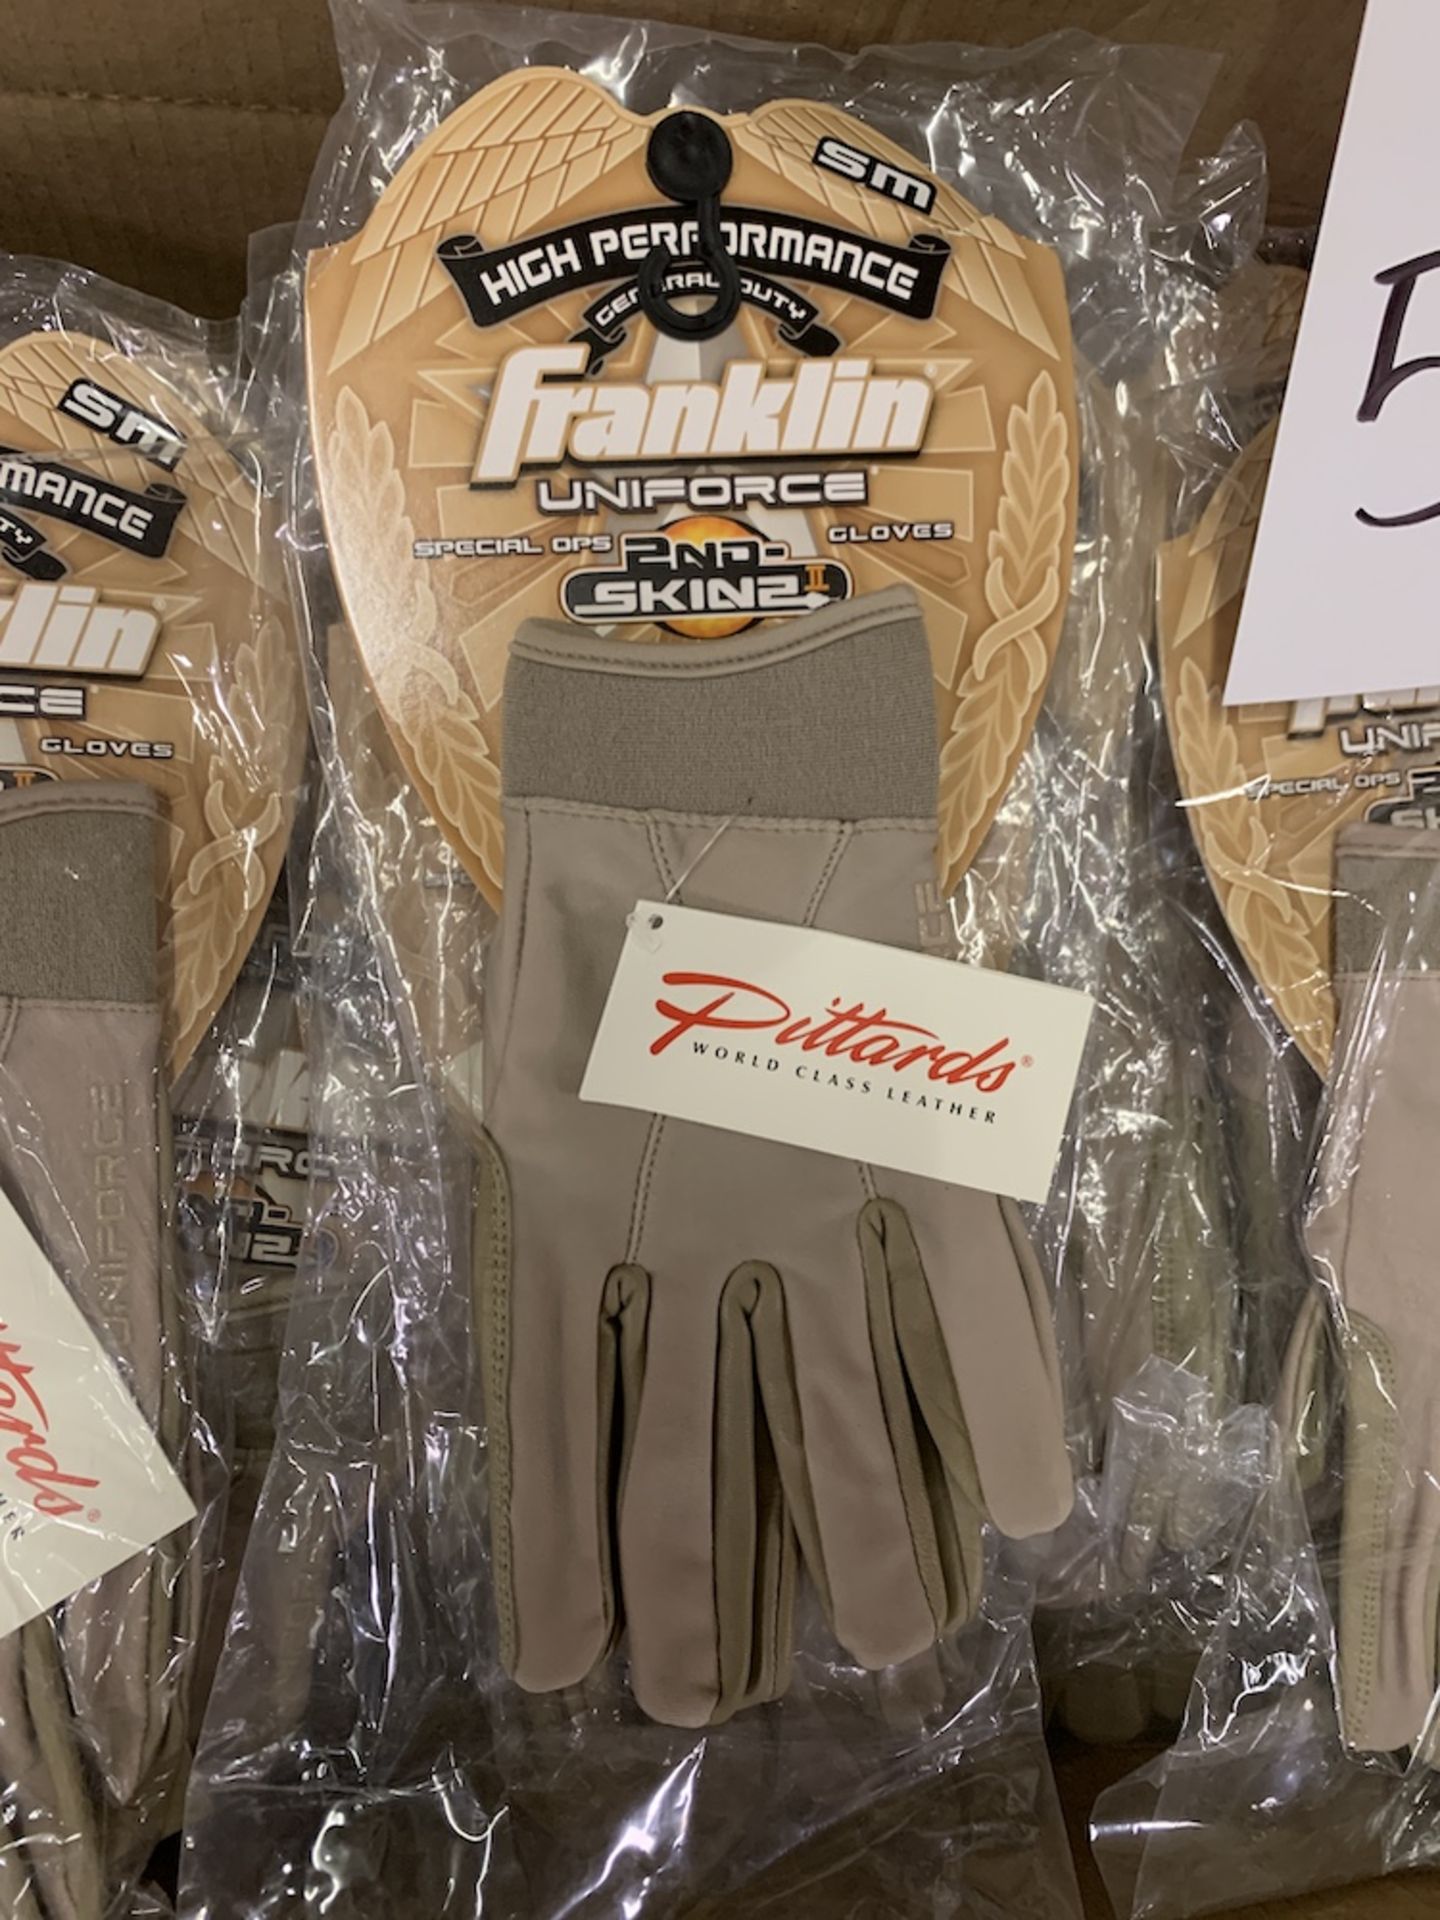 60 Pairs of Franklin Uniforce Gloves, High Performance 2nd Skinz Tan Sml, New in Packaging - Image 3 of 5